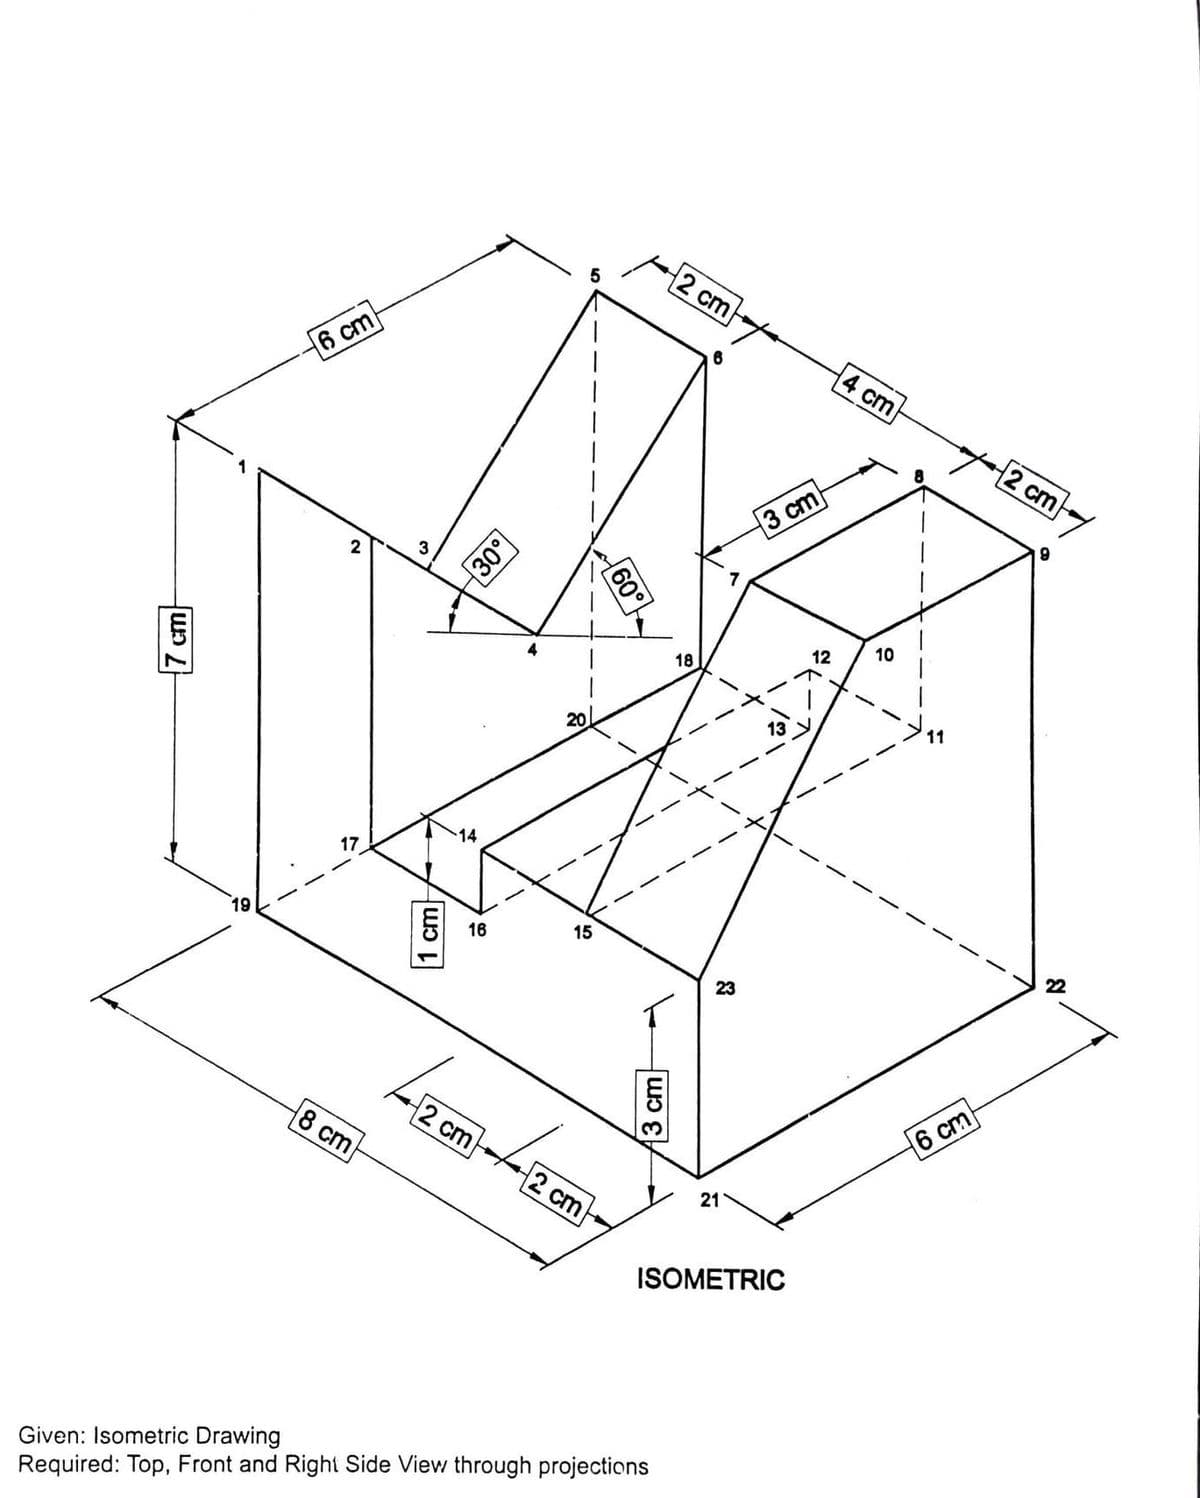 5
2 cm
6 cm
4 cm
2 cm
3 cm
2
3
10
12
18
11
20
14
17
19
15
16
22
23
6 cm
2 cm
8 cm
2 cm
21
ISOMETRIC
Given: Isometric Drawing
Required: Top, Front and Right Side View through projections
7 cm
1 cm
60°
3 cm
